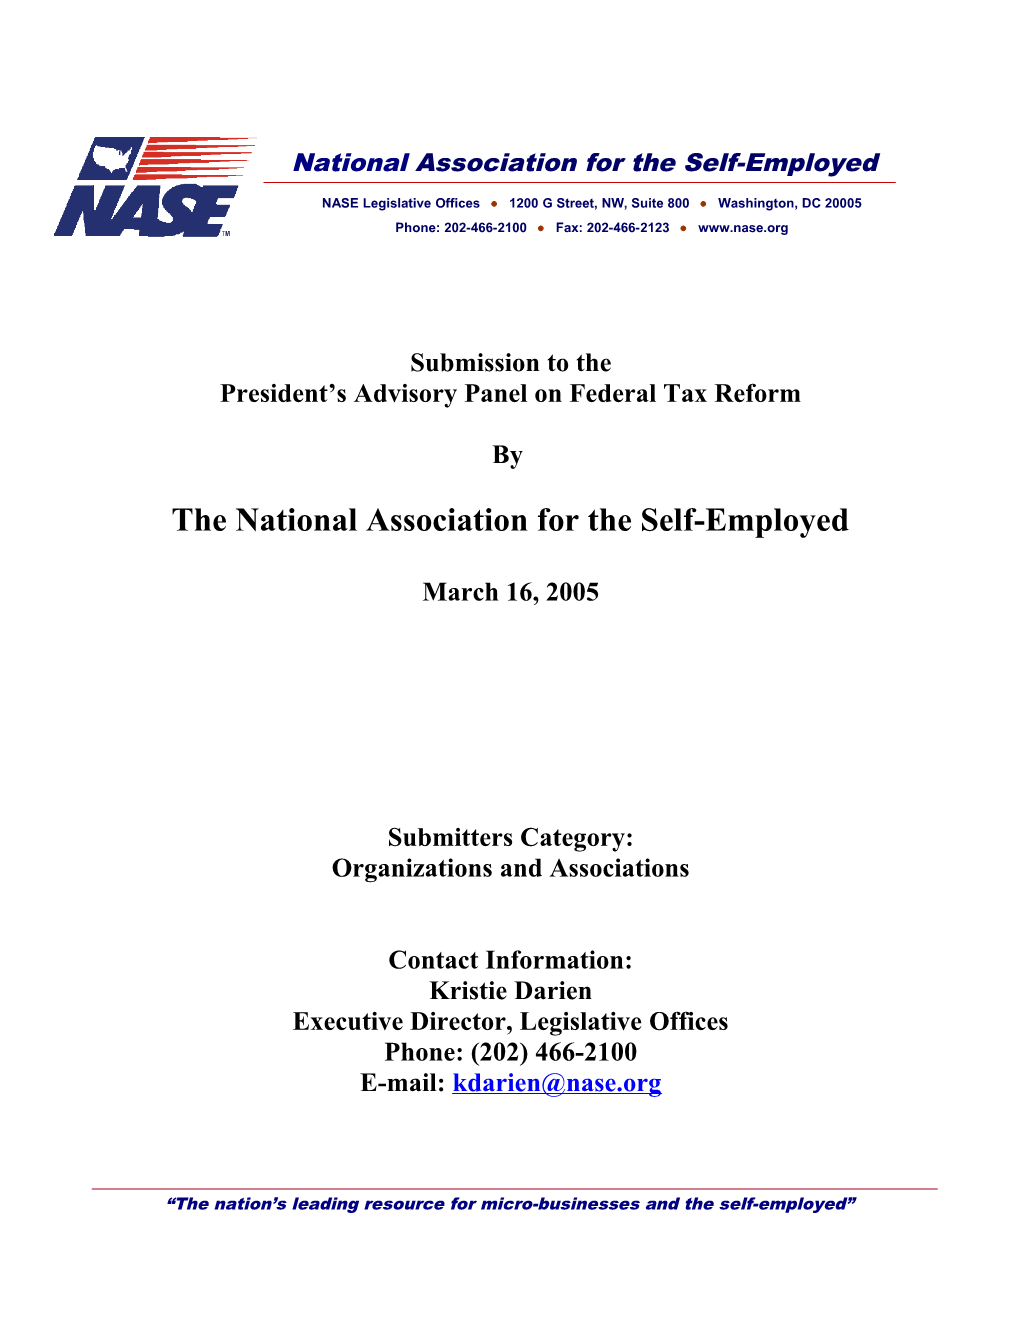 National Association for the Self-Employed